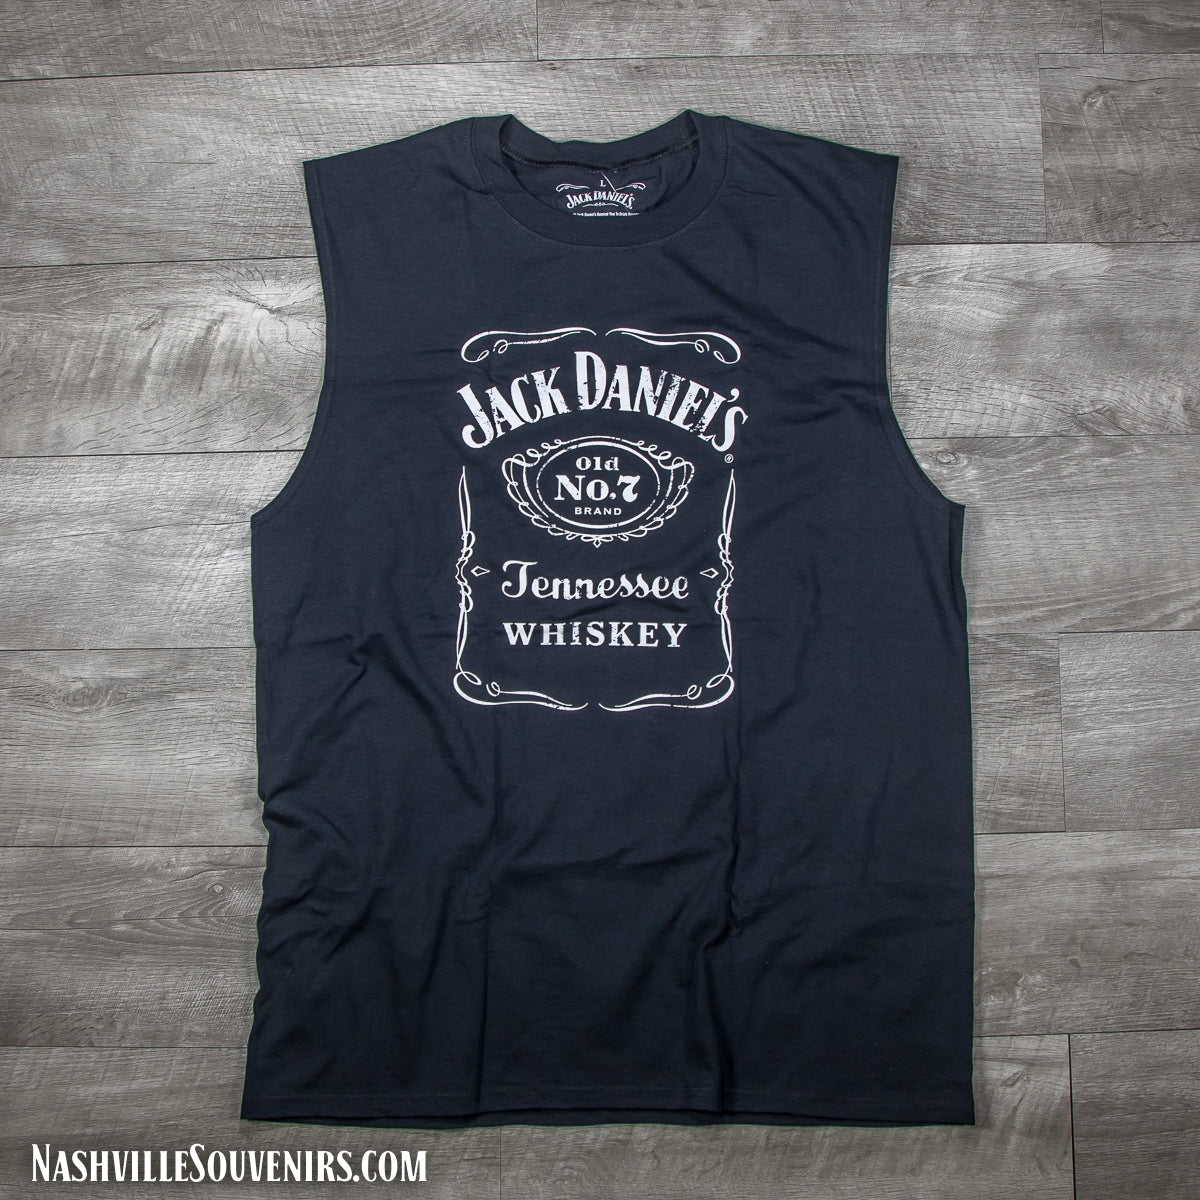 Officially licensed Jack Daniels Bottle Label Sleeveless T-Shirt in black with white bottle label logo. Get yours today with FREE SHIPPING on all US orders over $75!